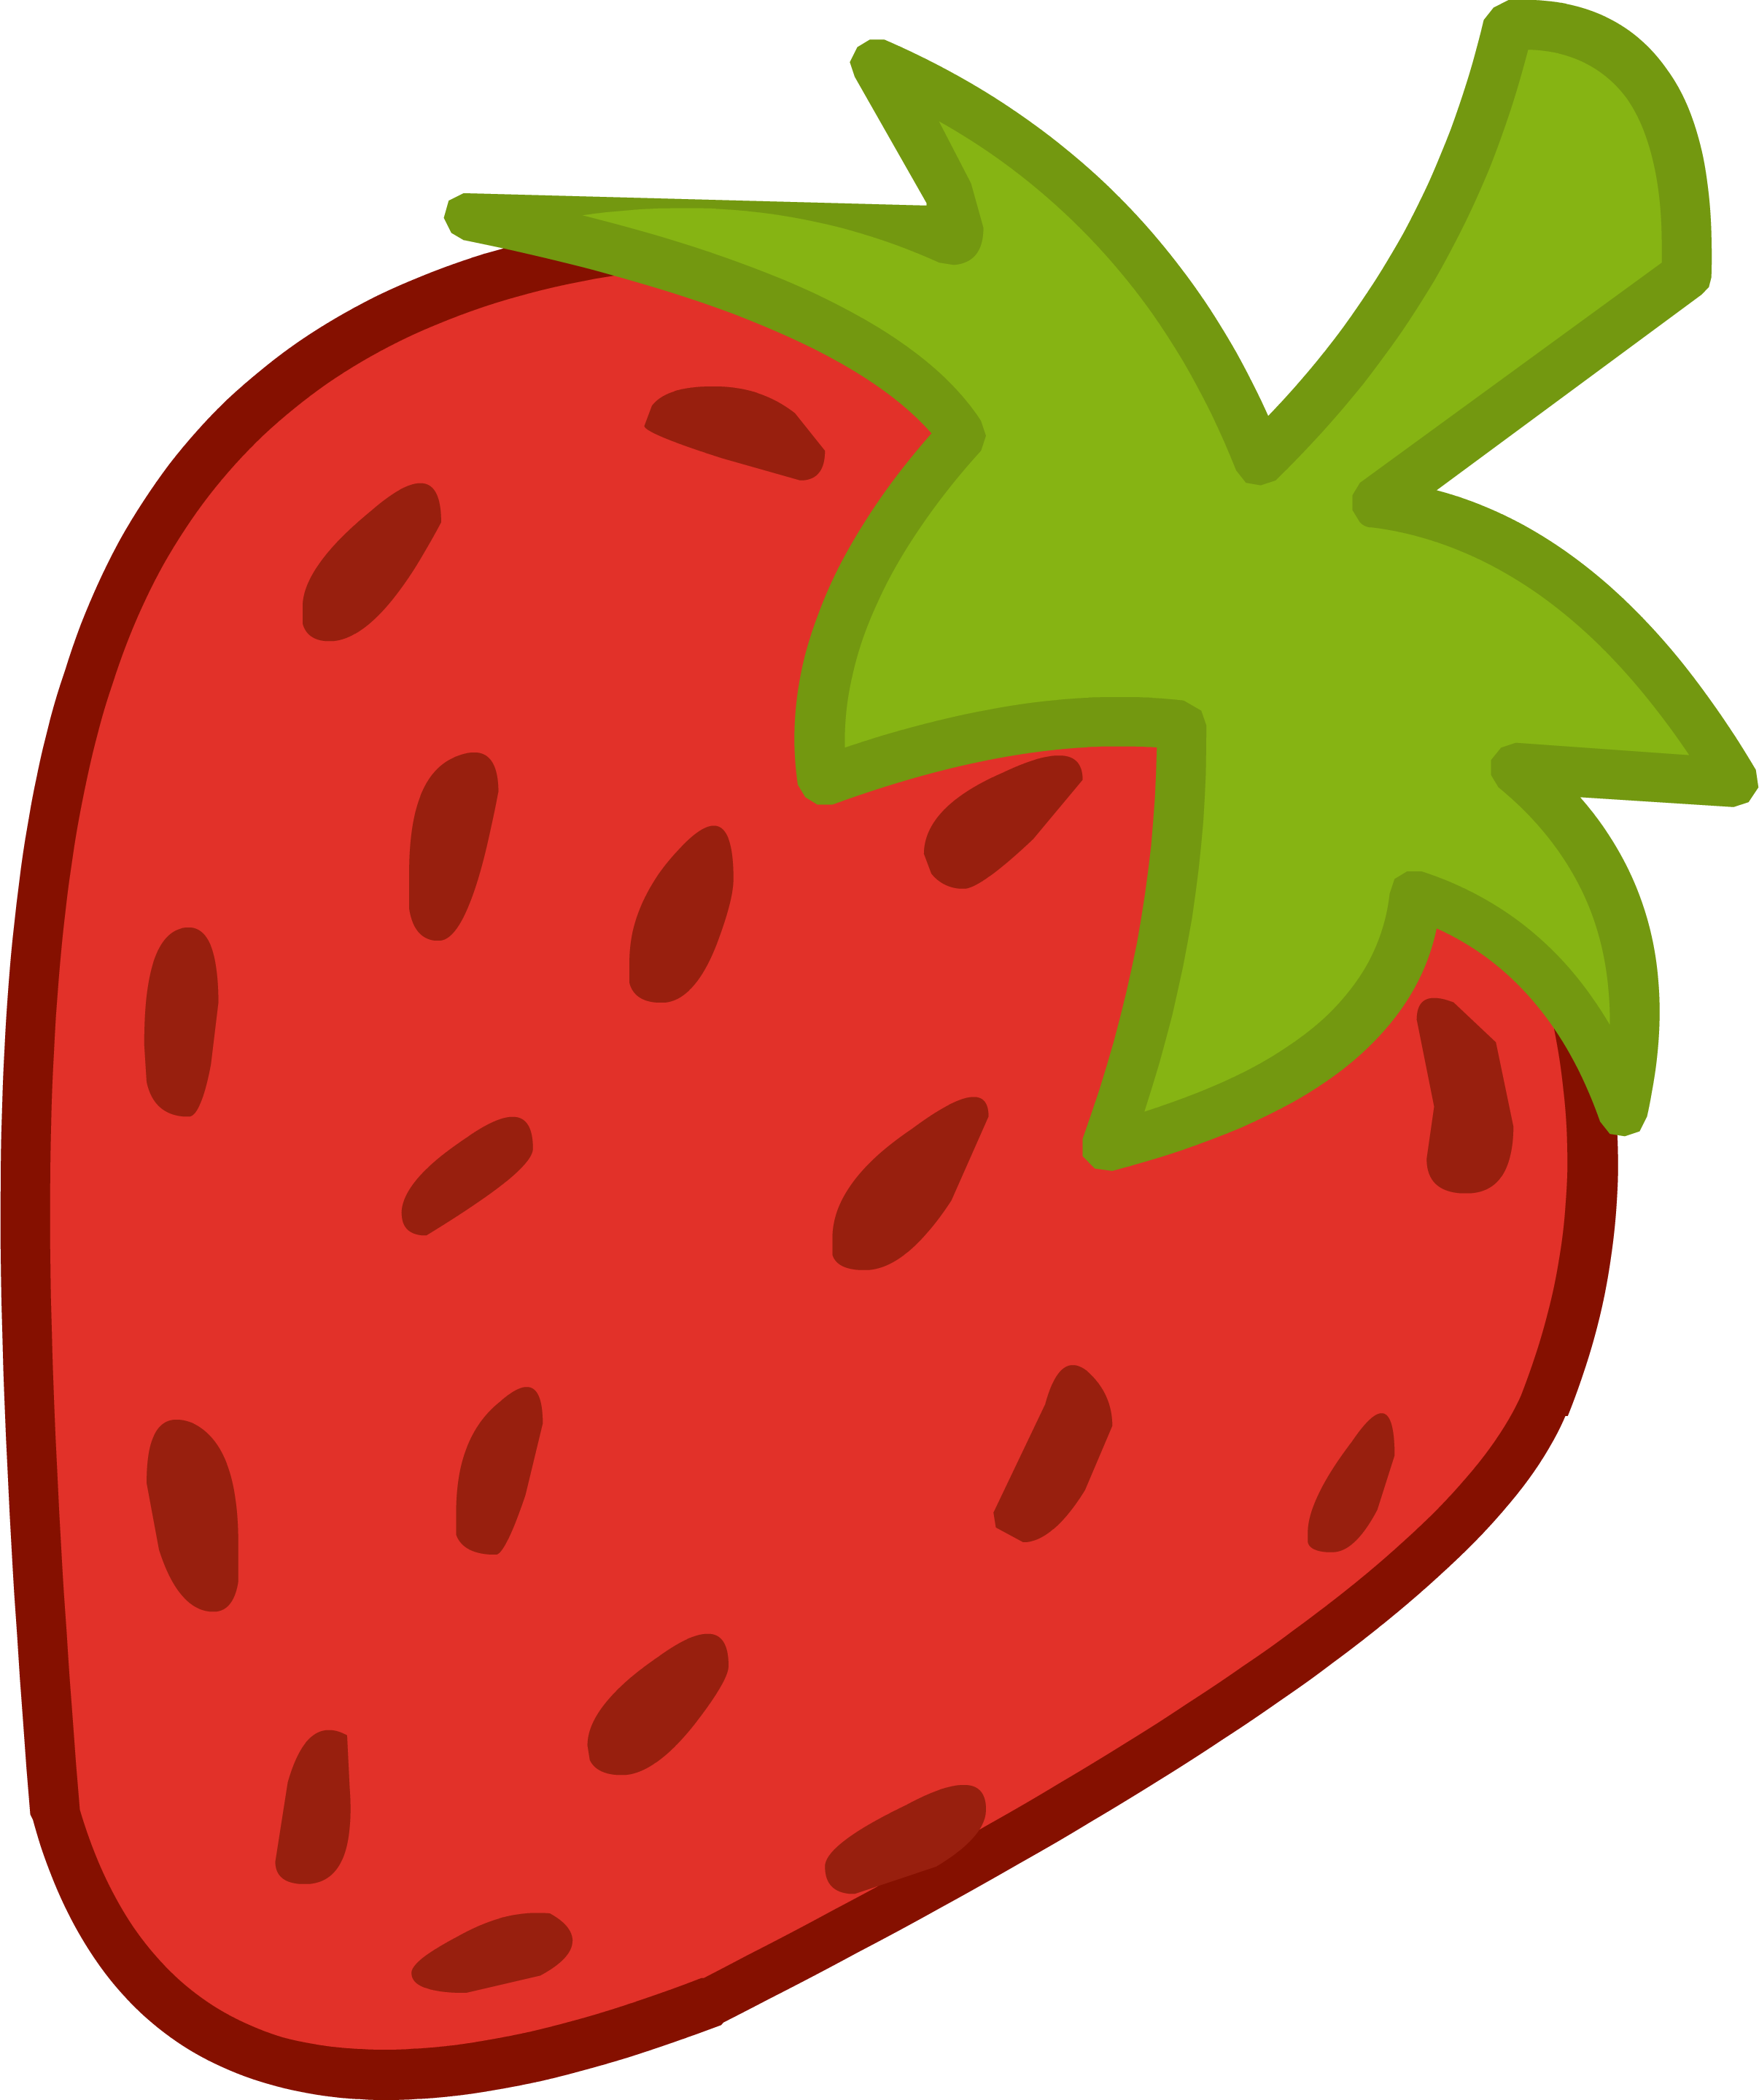 free strawberry clipart black and white - photo #41